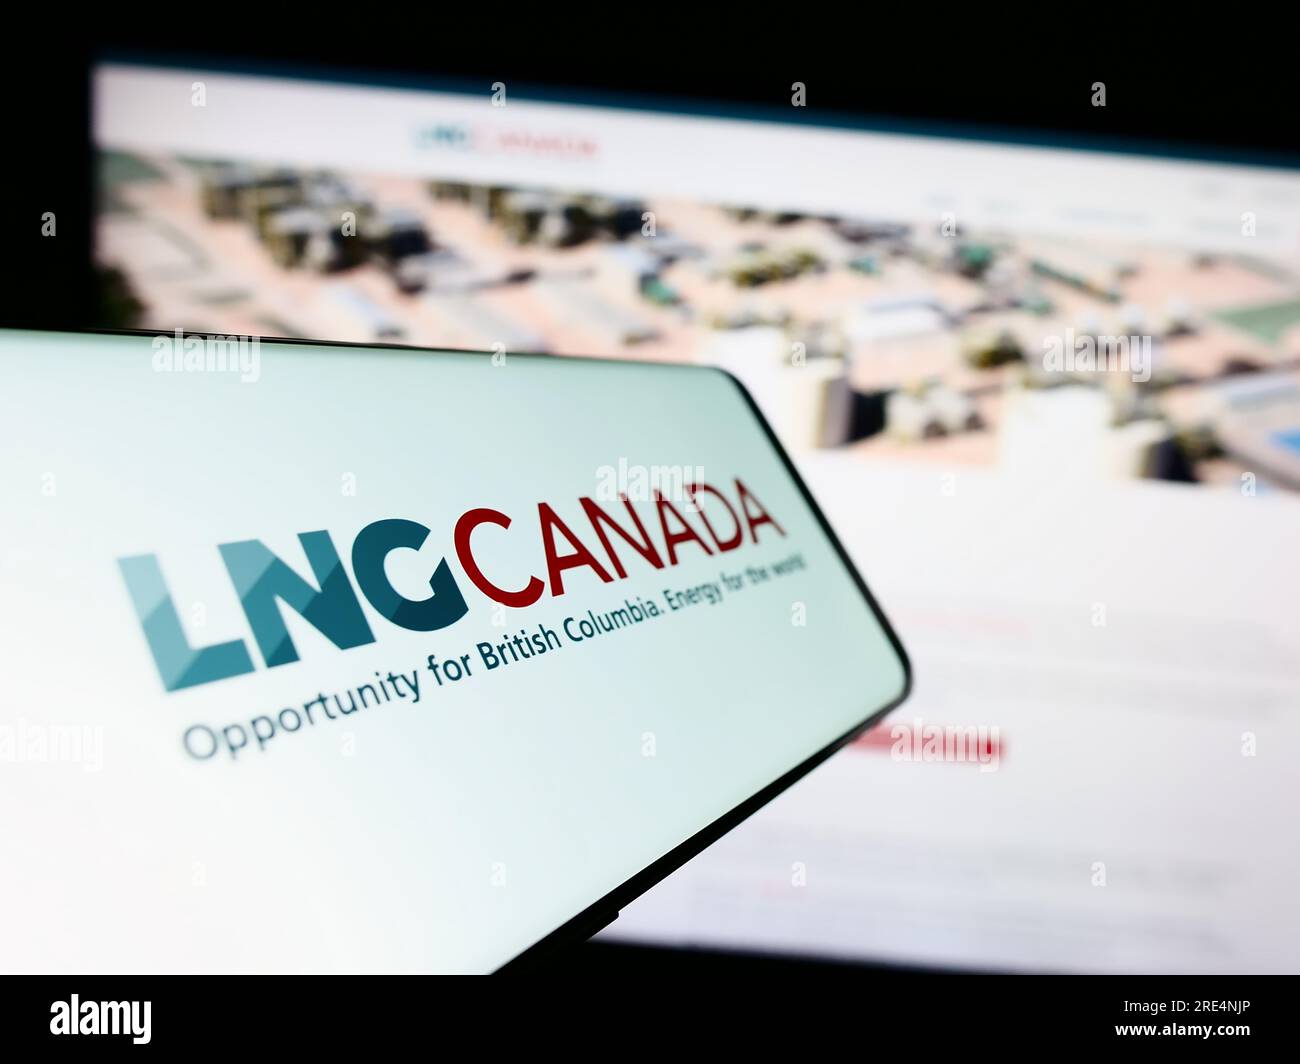 Mobile phone with logo of industrial energy project LNG Canada on screen in front of website. Focus on center of phone display. Stock Photo